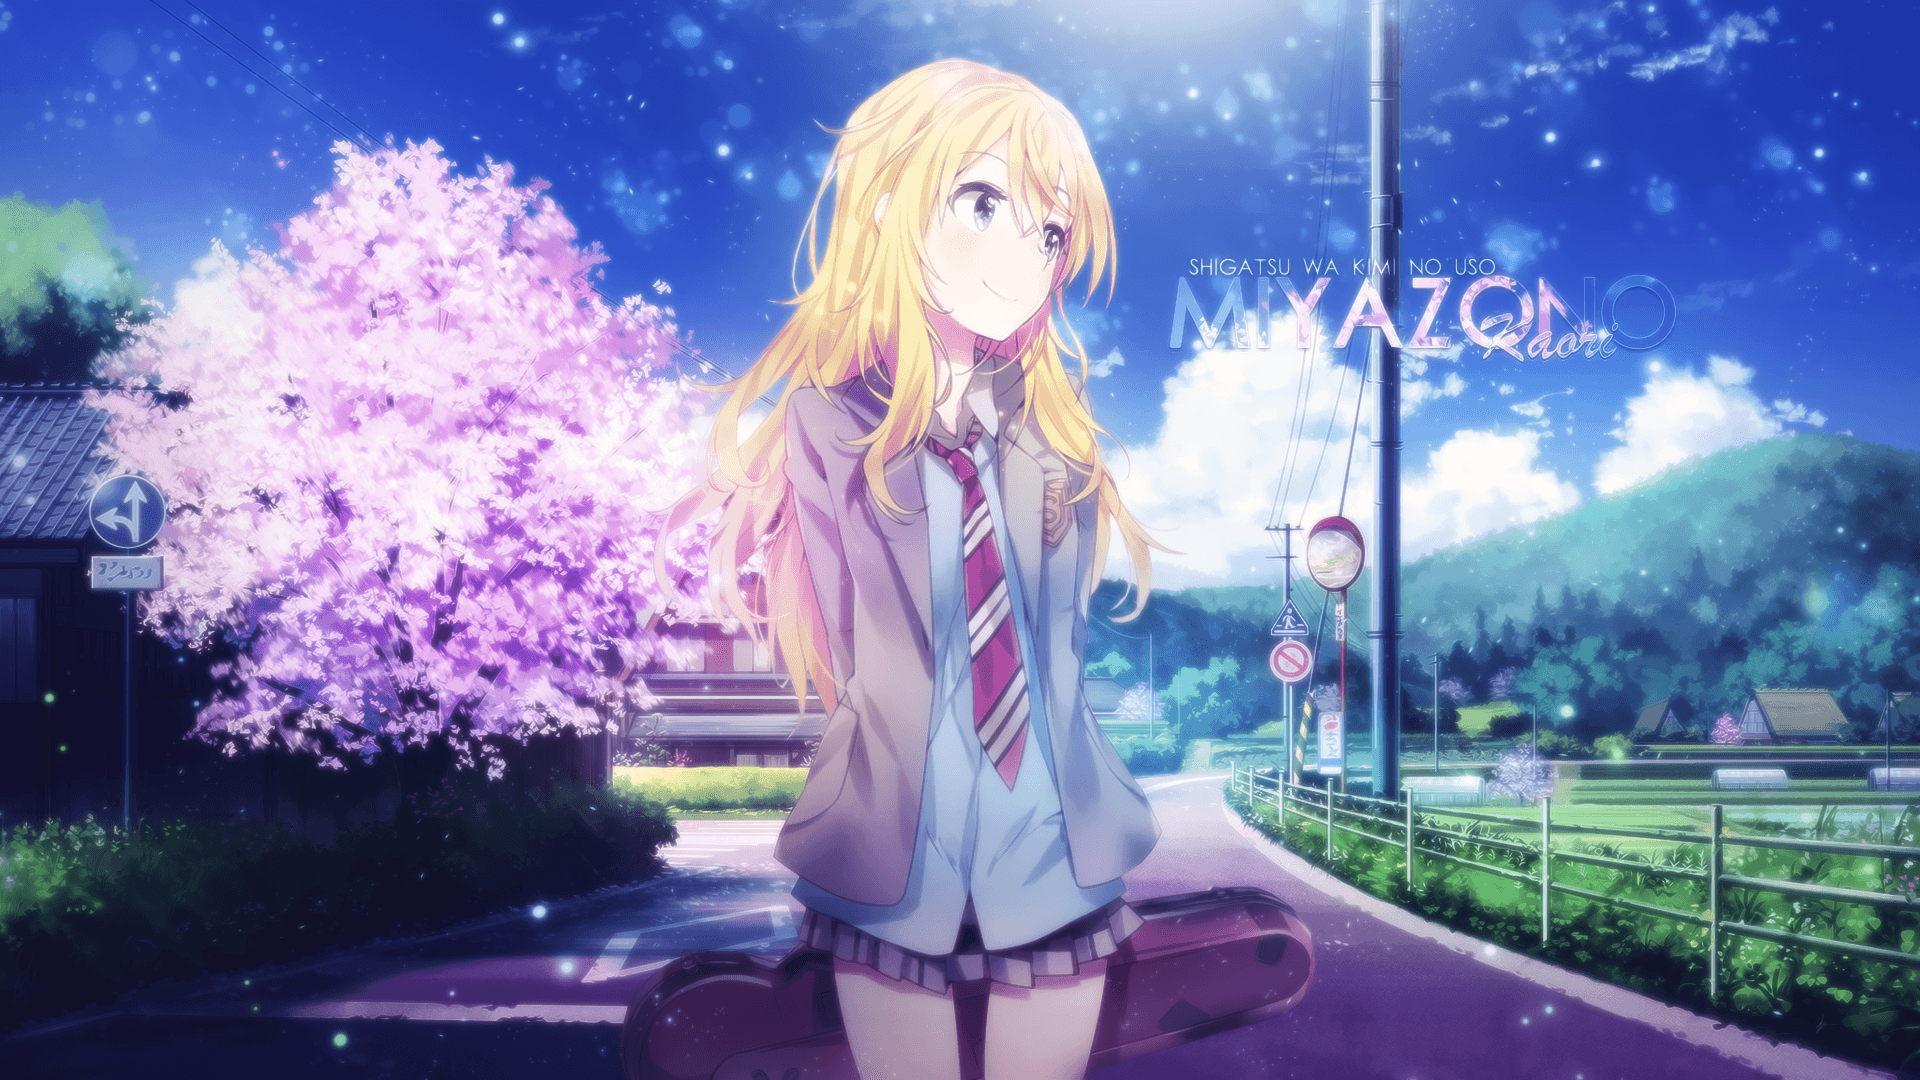 Your Lie In April Wallpaper HD Free download